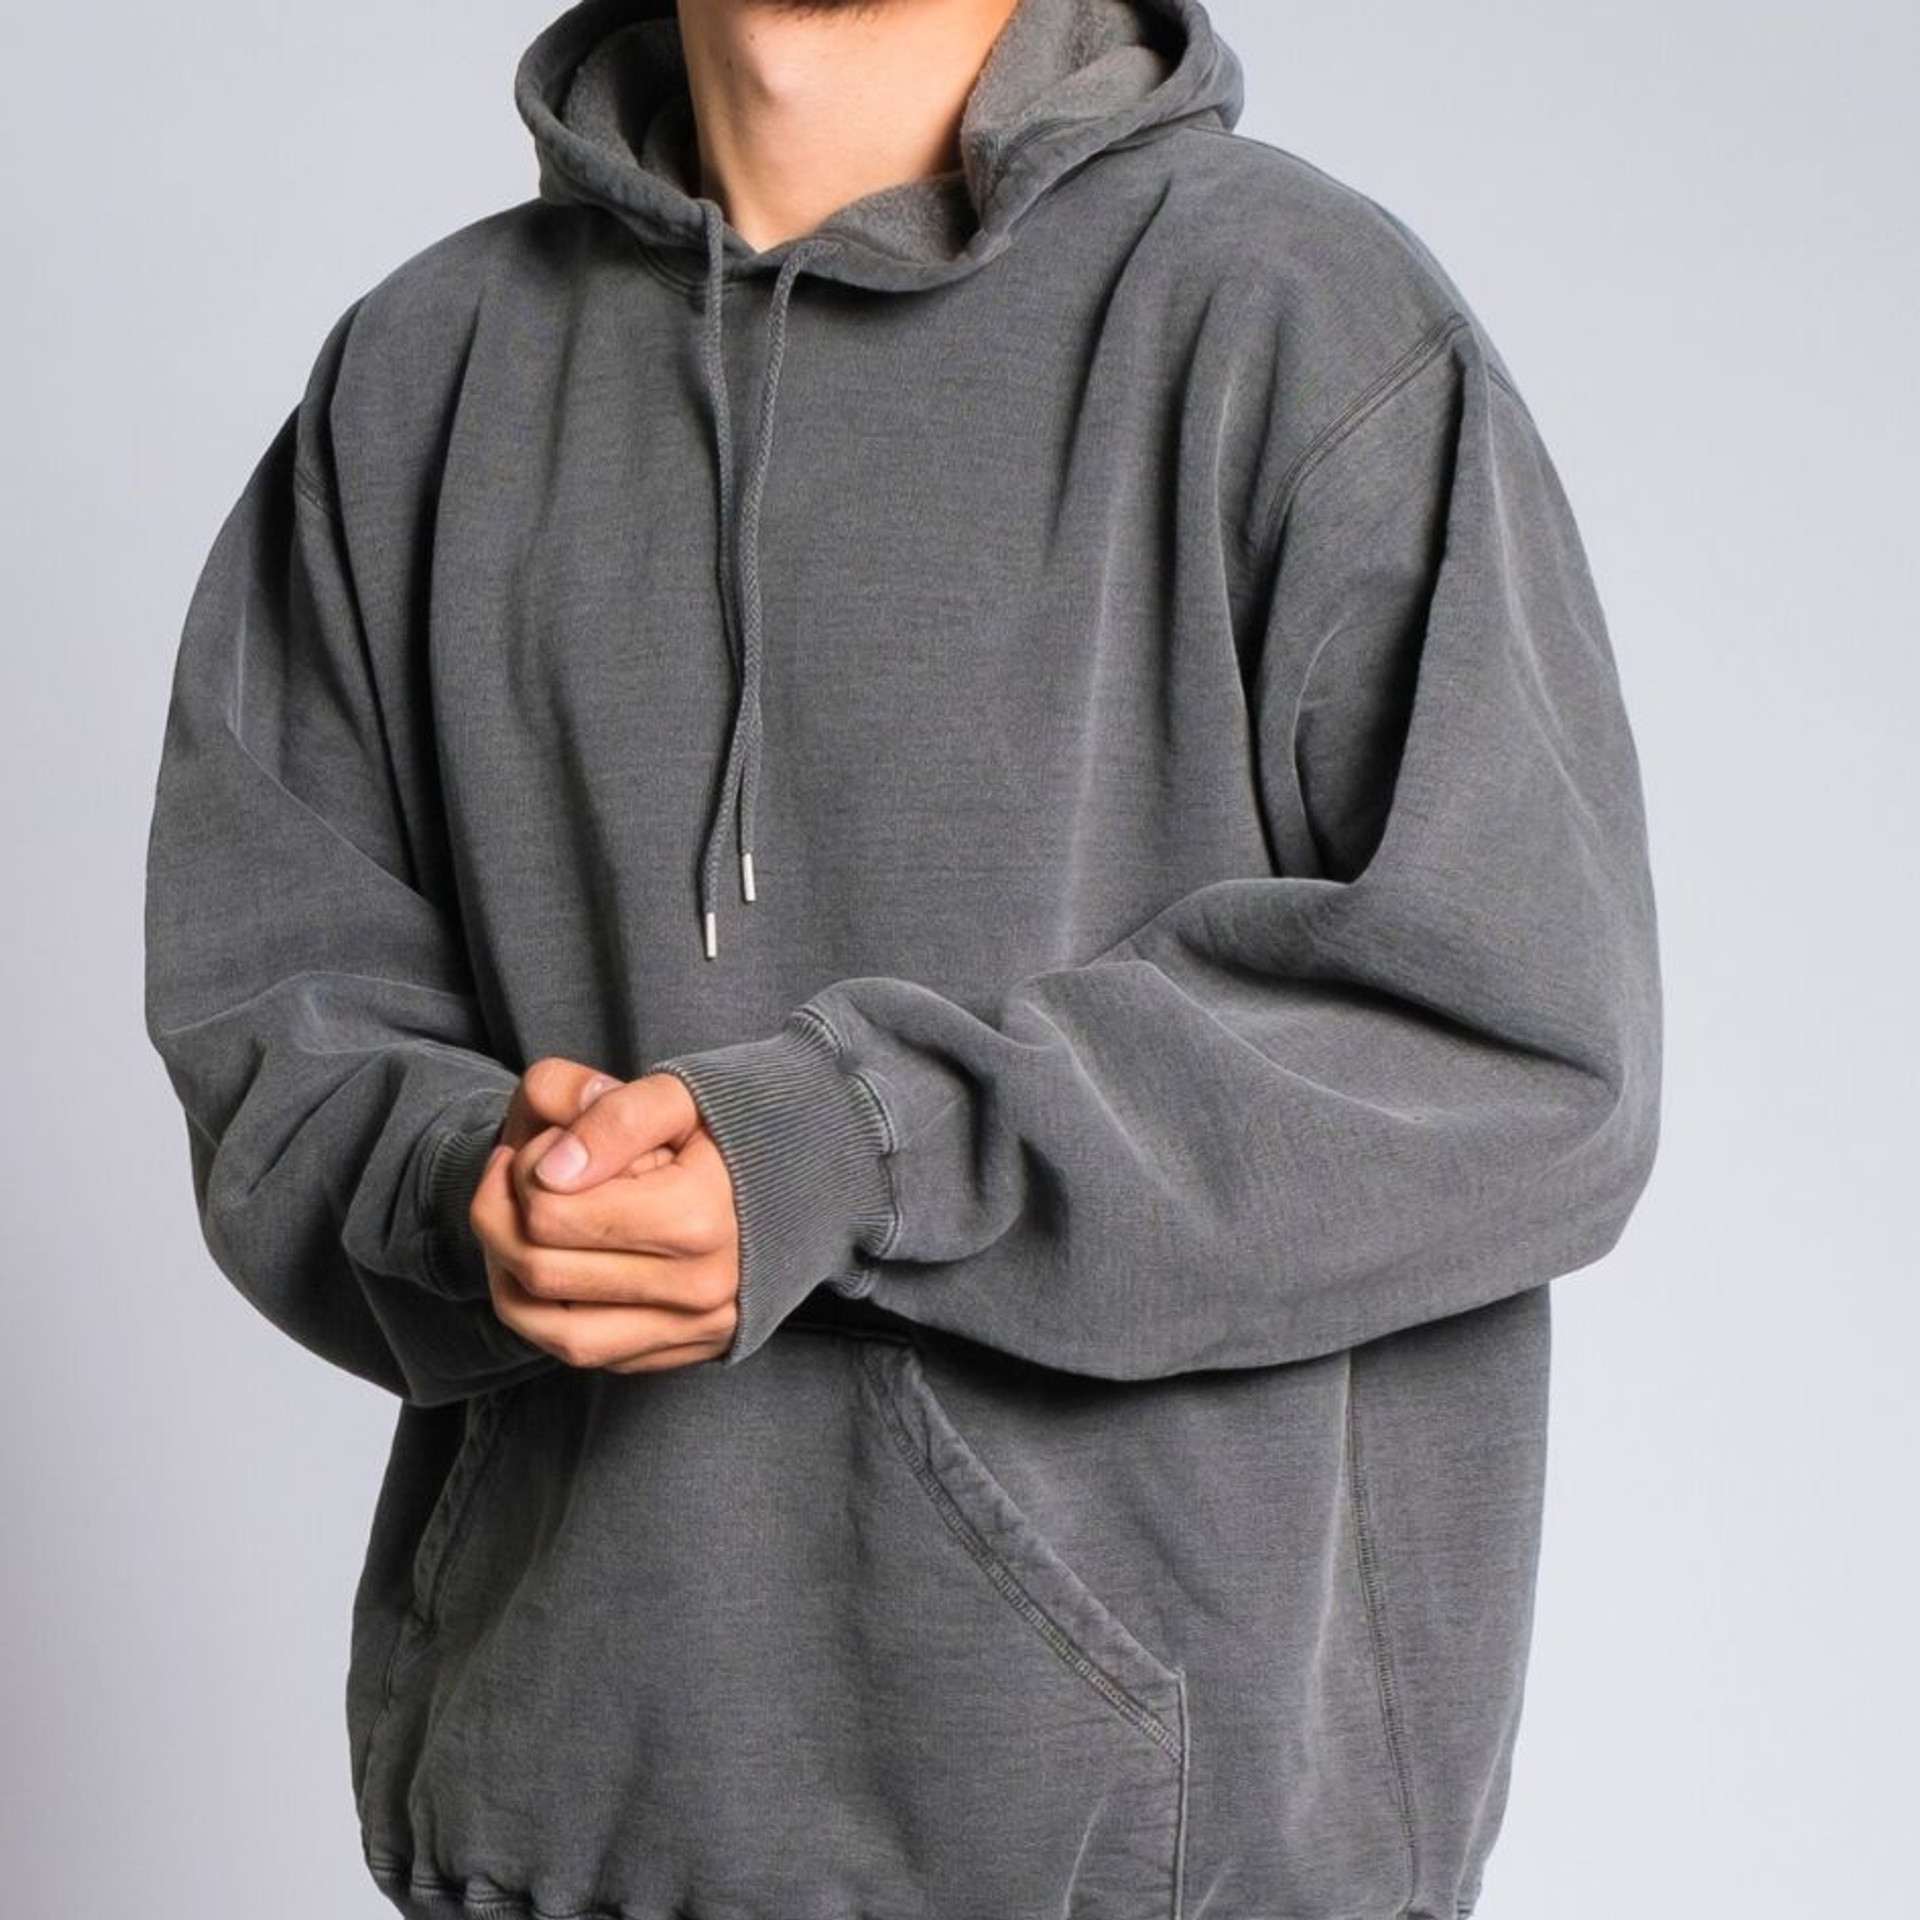 Hooded Pullover Black Sand 100% Cotton | Men's Heavyweight Hooded